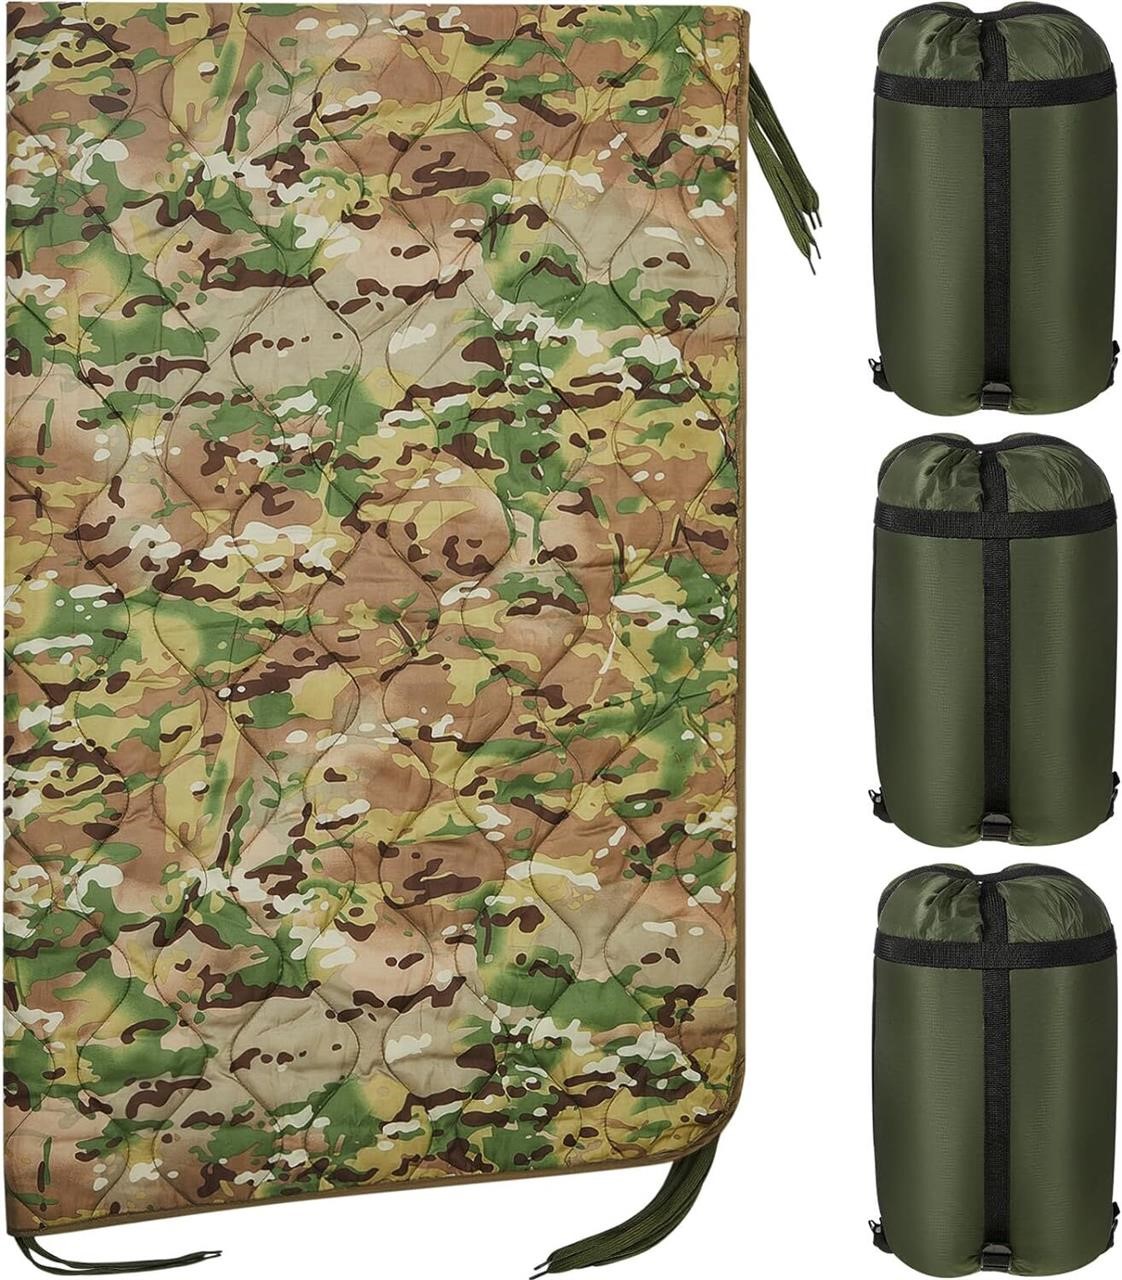 Barydat Military Poncho Liner  80x60  3-Pack